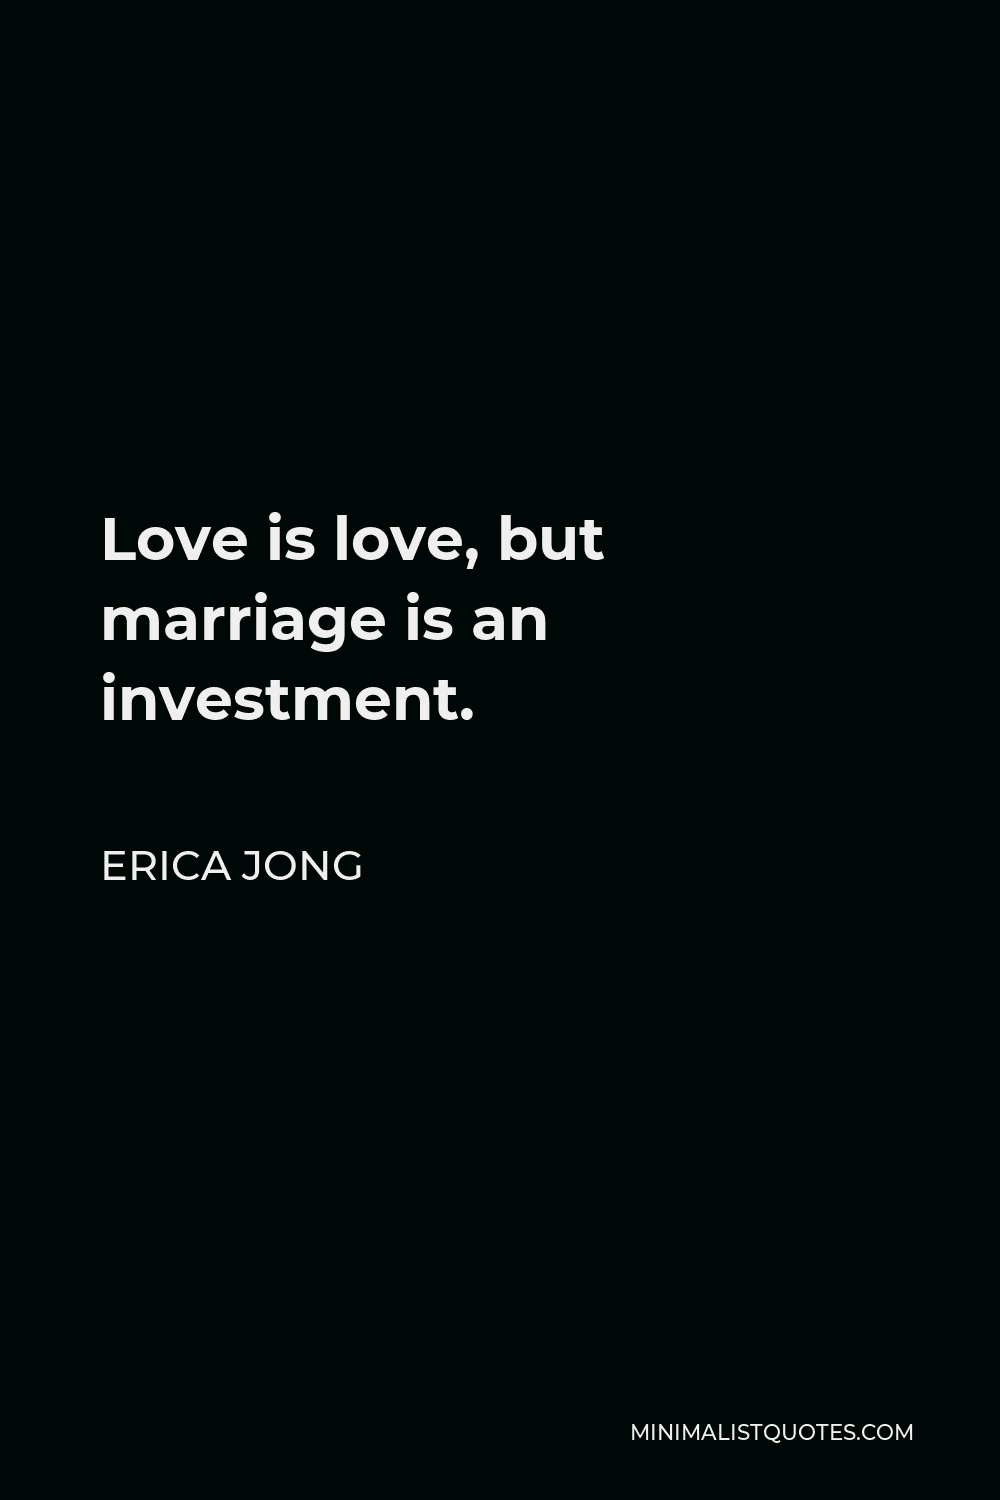 Erica Jong Quote - Love is love, but marriage is an investment.